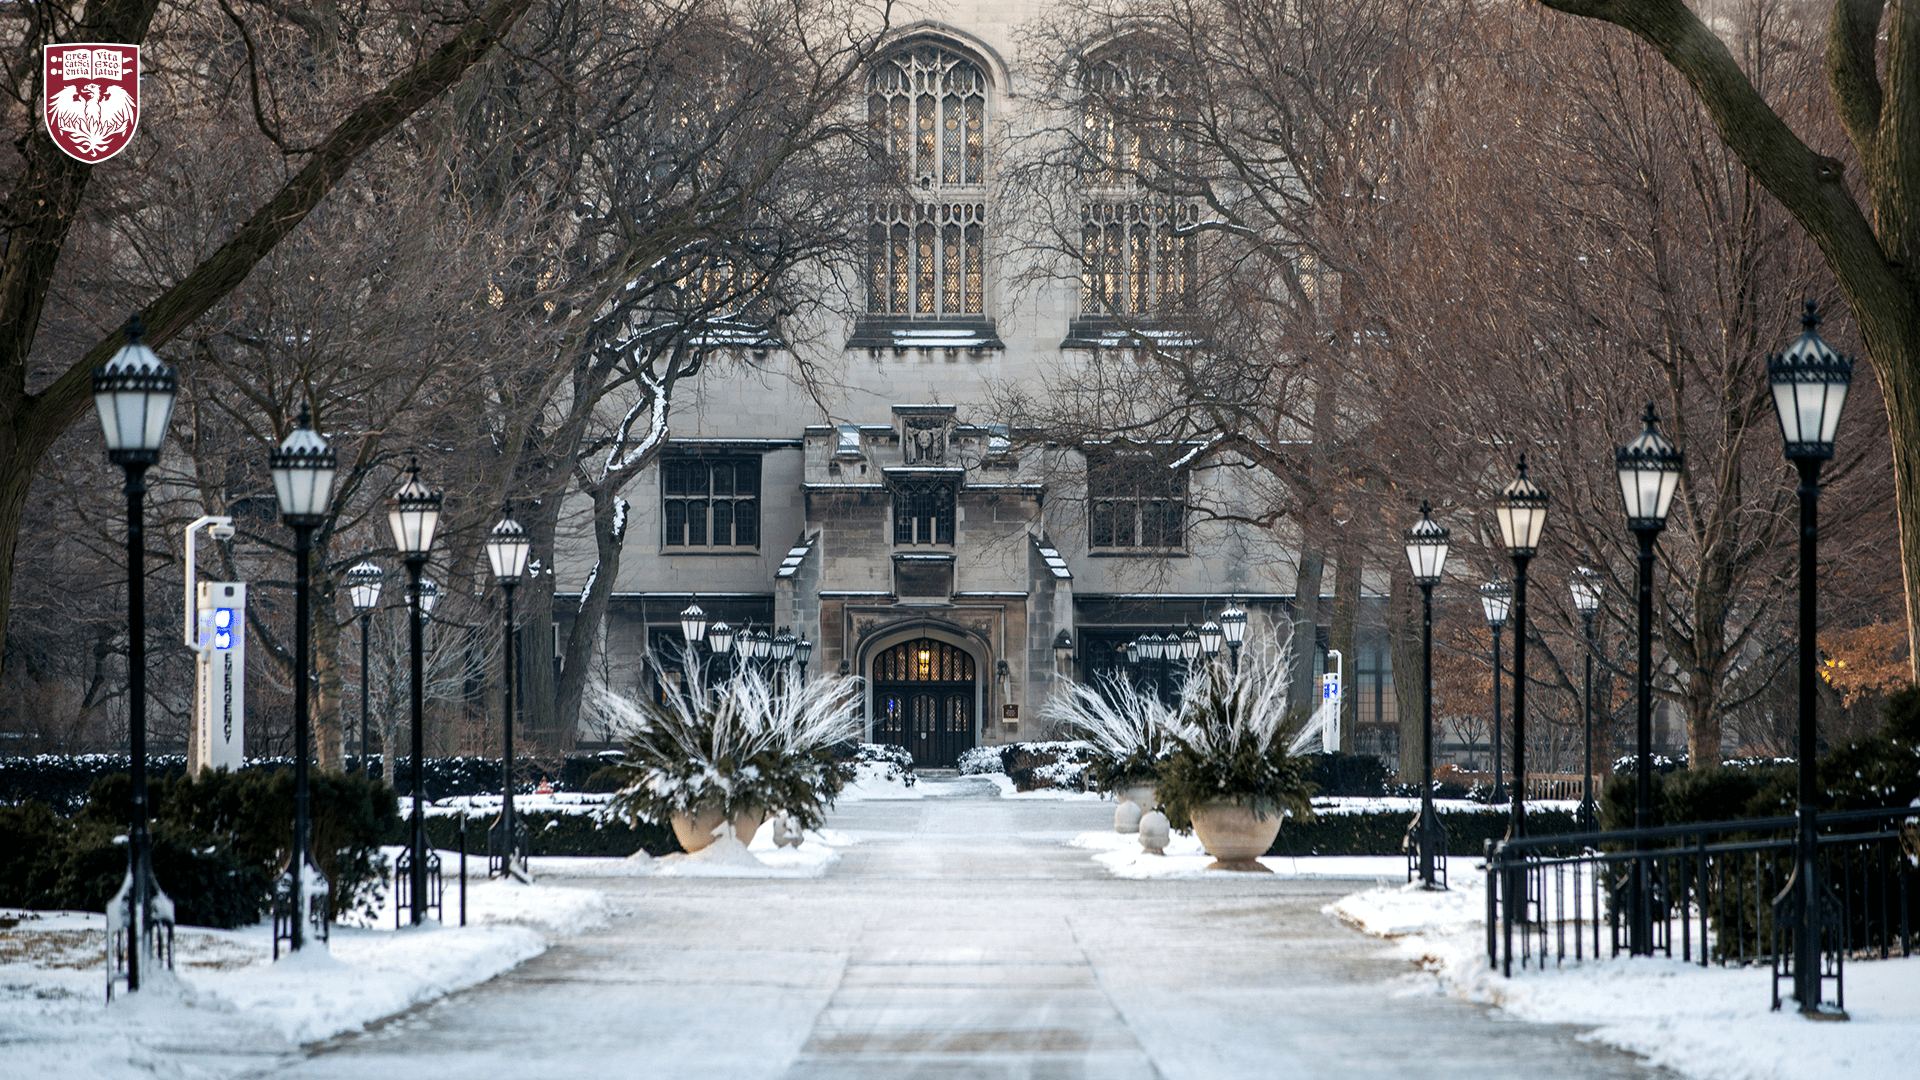 View down campus quad walkway dusted with snow and street lamps along the path/> 
</a></div>
			</div>
			</div>
				
				
				
				
			</div>
				
				
			</div><div class=